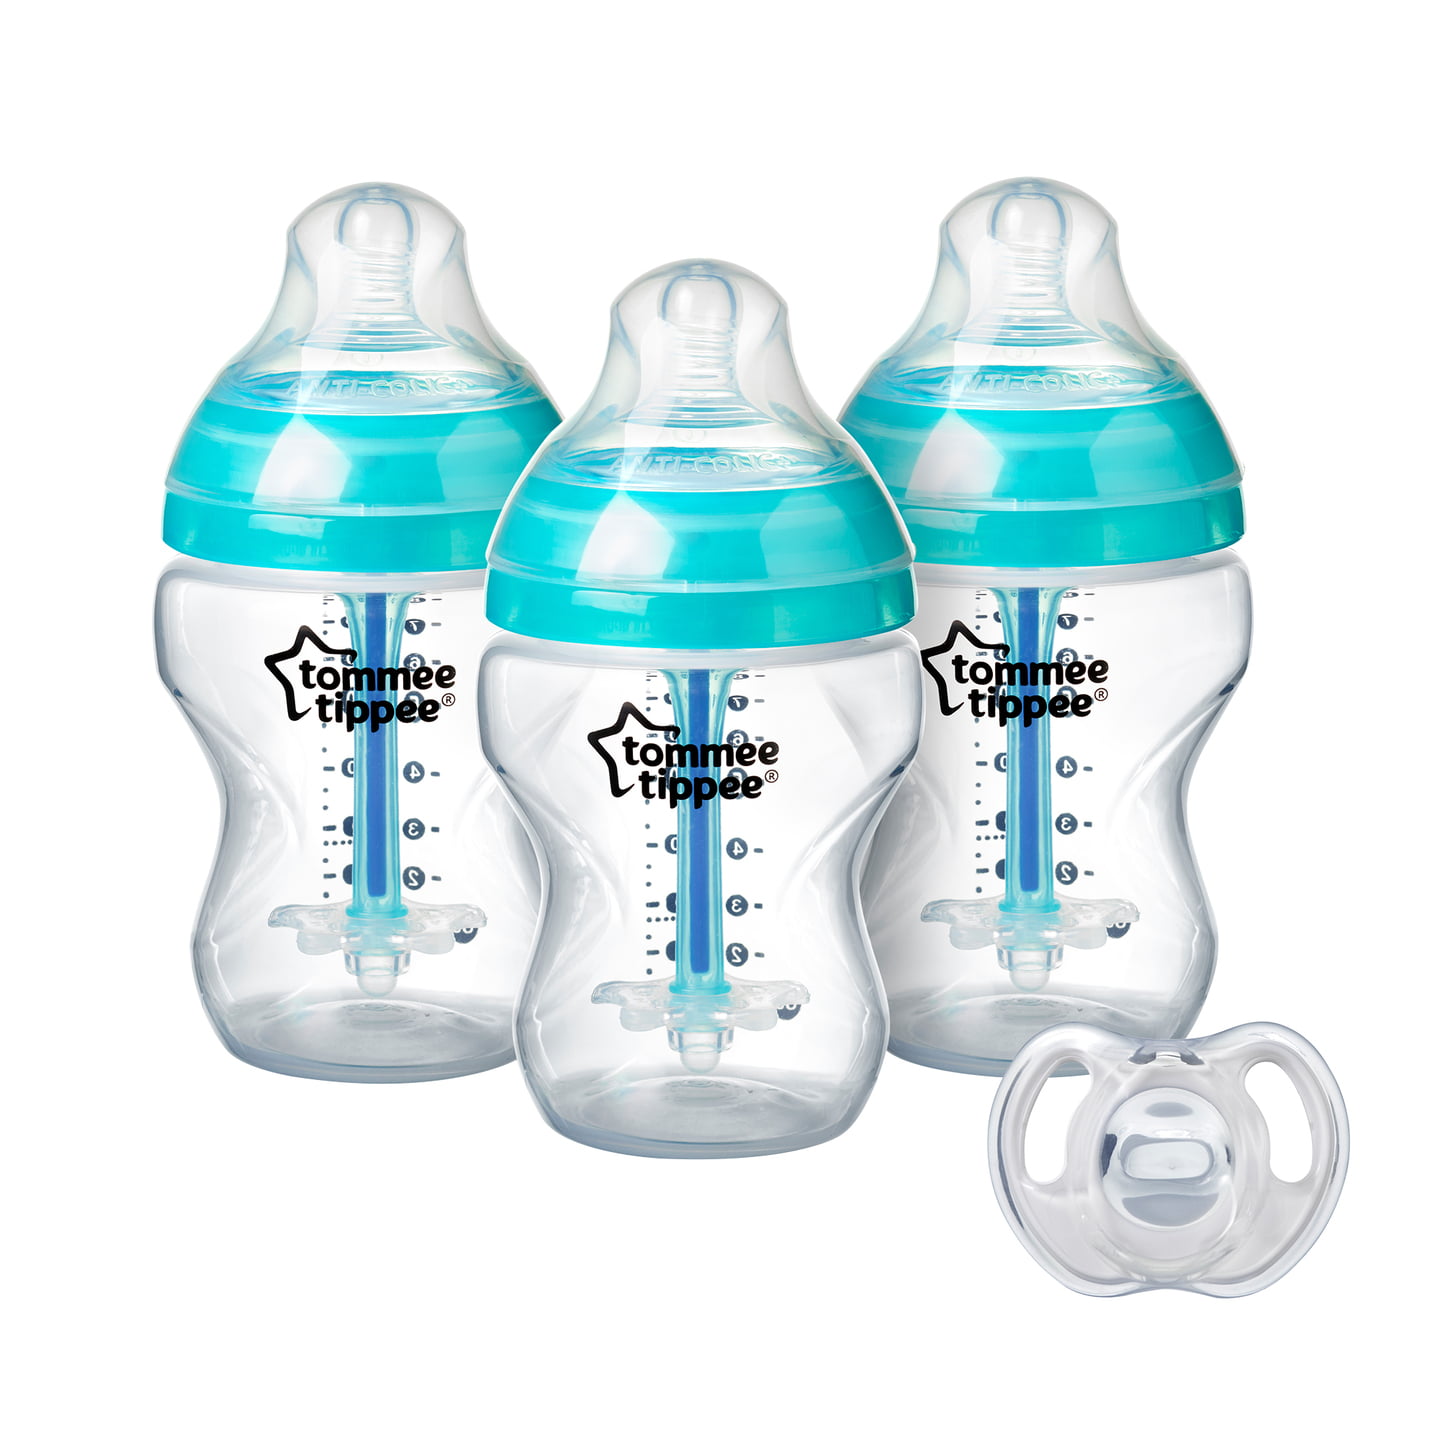 PERSONALISED DUMMY ALL TEATS & SIZES BO AVENT TOMMEE TIPPEE MAM 